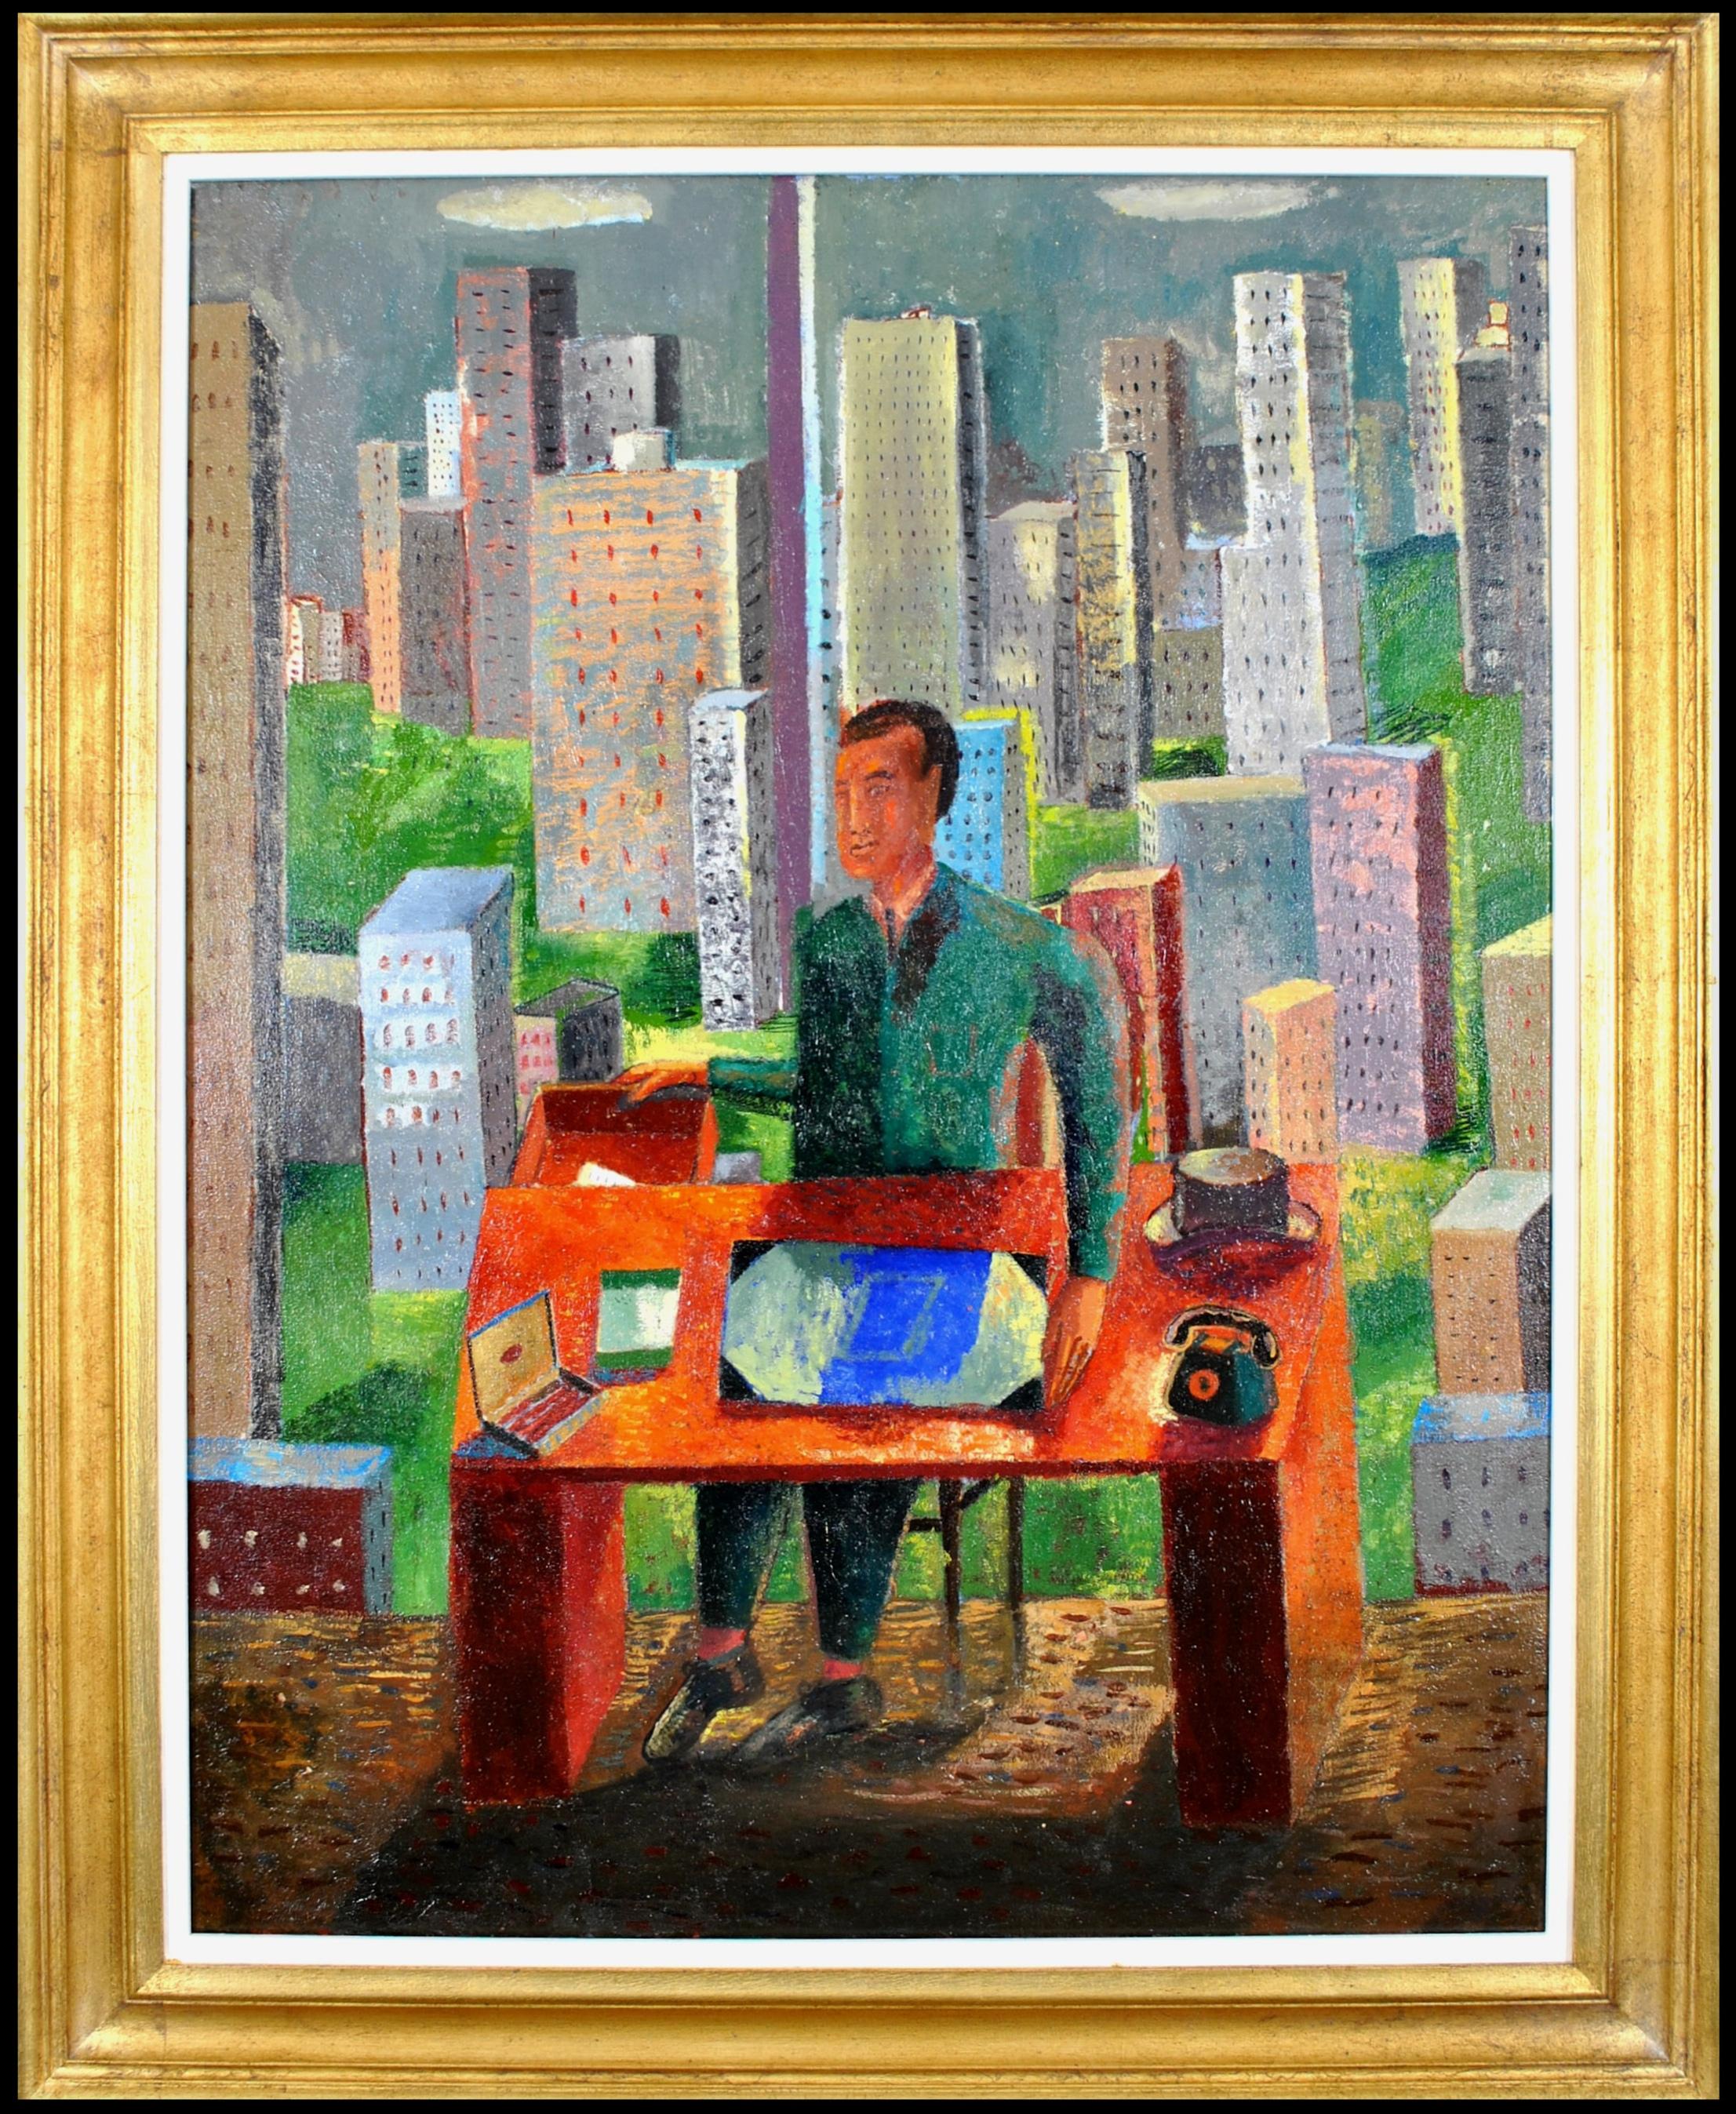 Unknown Figurative Painting - Myself as a Big Boss in New York - Large Figurative Portrait Oil Painting